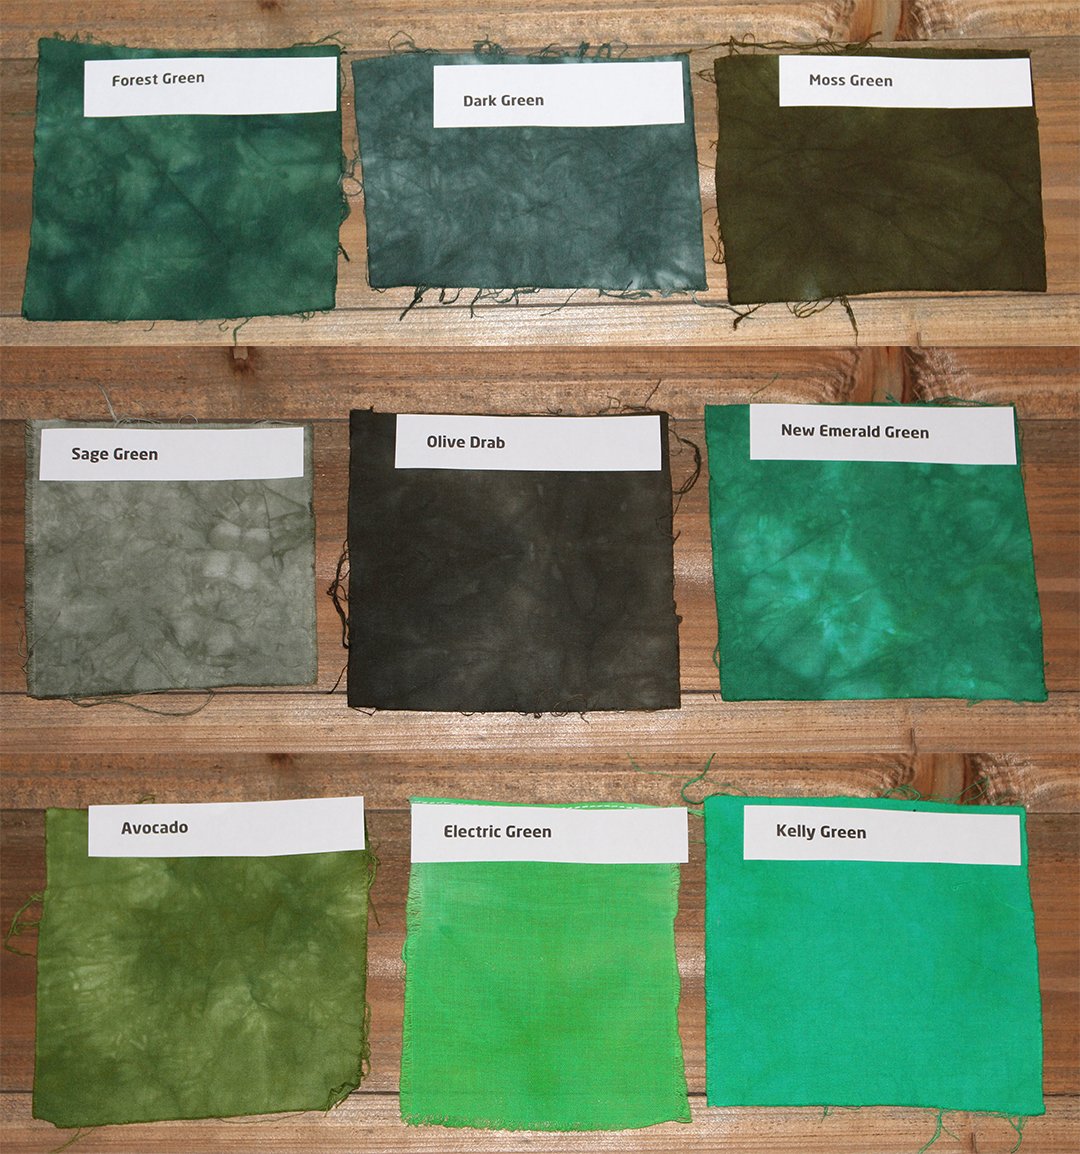 Dharma fiber reactive dye- cotton swatches in gray & blue & green : r/dyeing